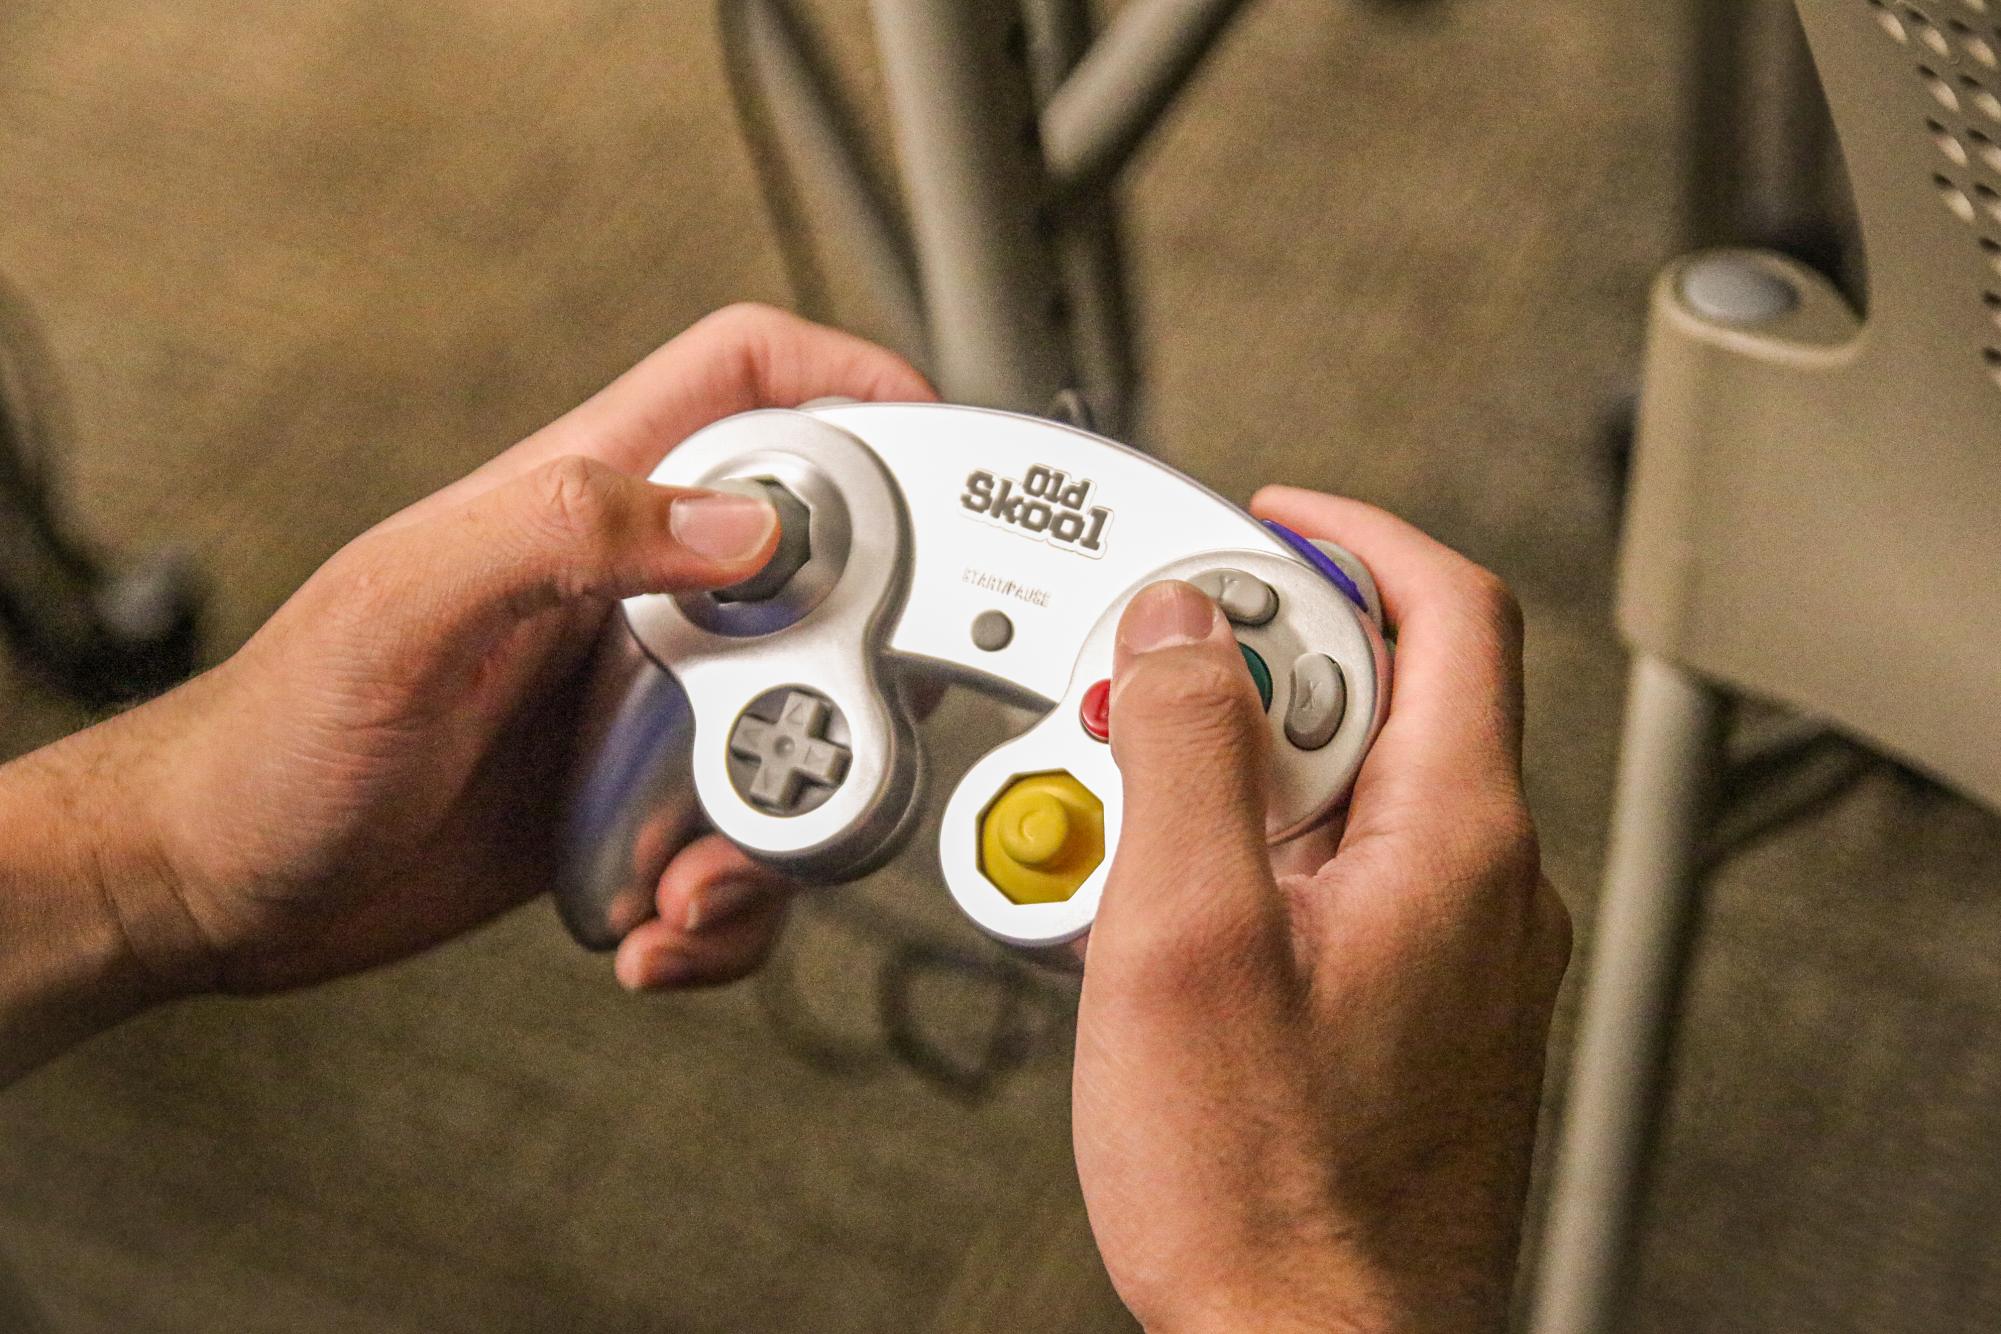 A smash club member holds up an Old Skool controller.